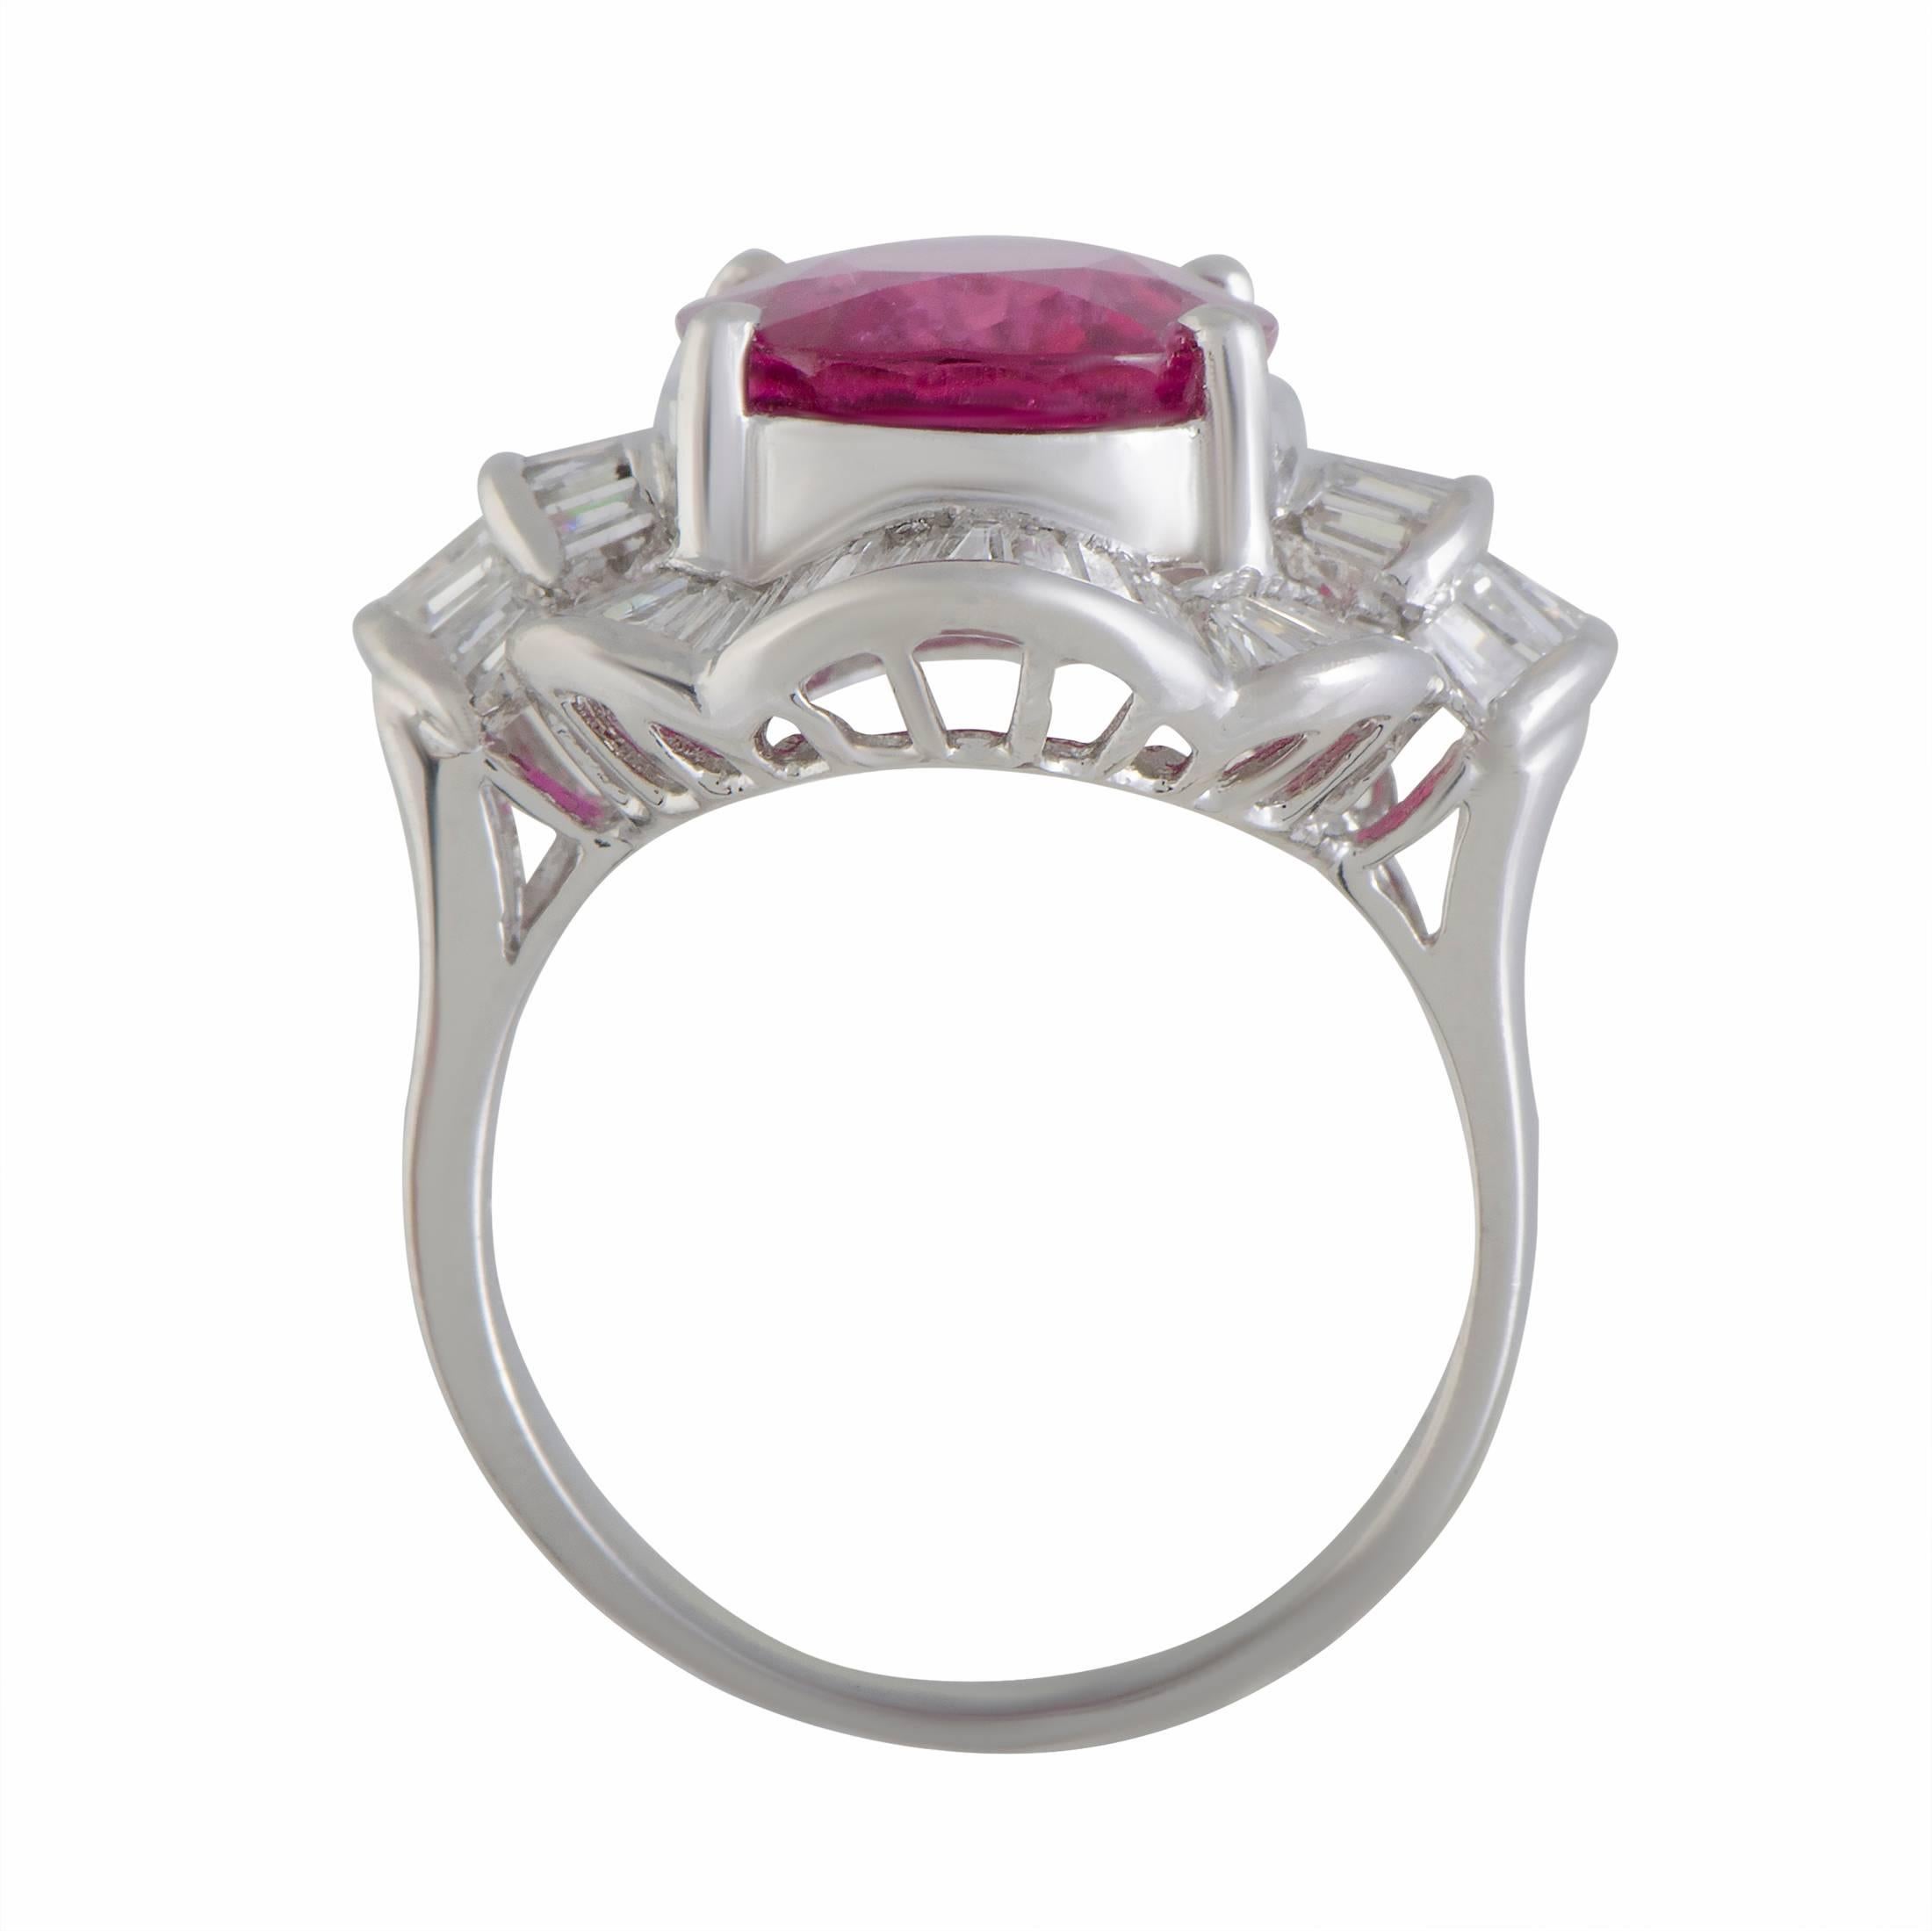 A perfect choice if you wish to complete your look with a luxuriously embellished piece, this superb ring boasts an incredibly glamorous appeal. Made of platinum, the ring is decorated with 1.34 carats of diamonds and an eye-catching pink tourmaline